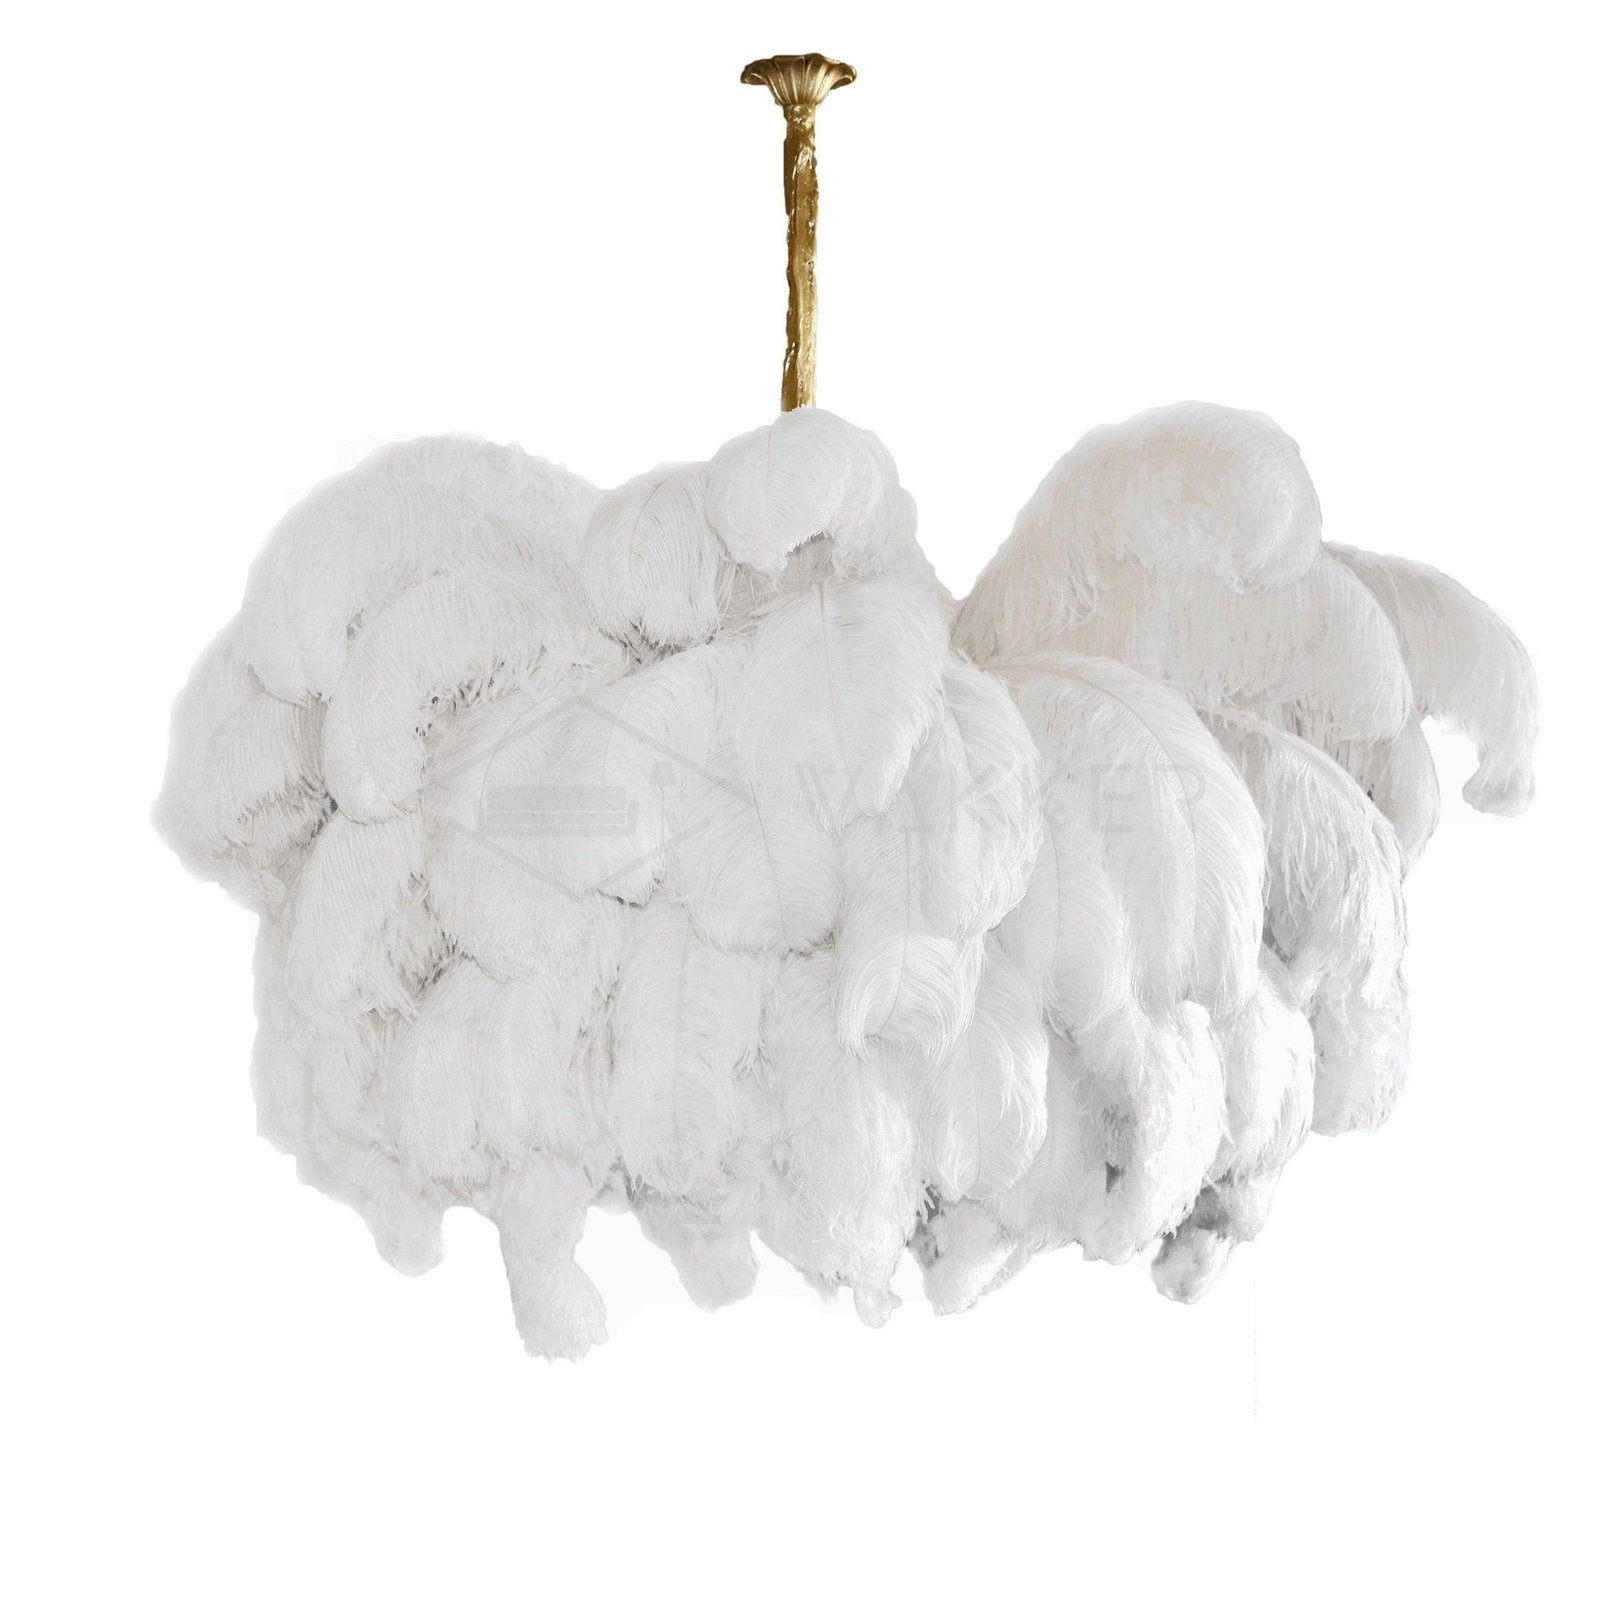 43.3" x 47.2" Ostrich Feather Chandeliers, 110cm x 120cm Diameter, with Polished Brass and White Finish